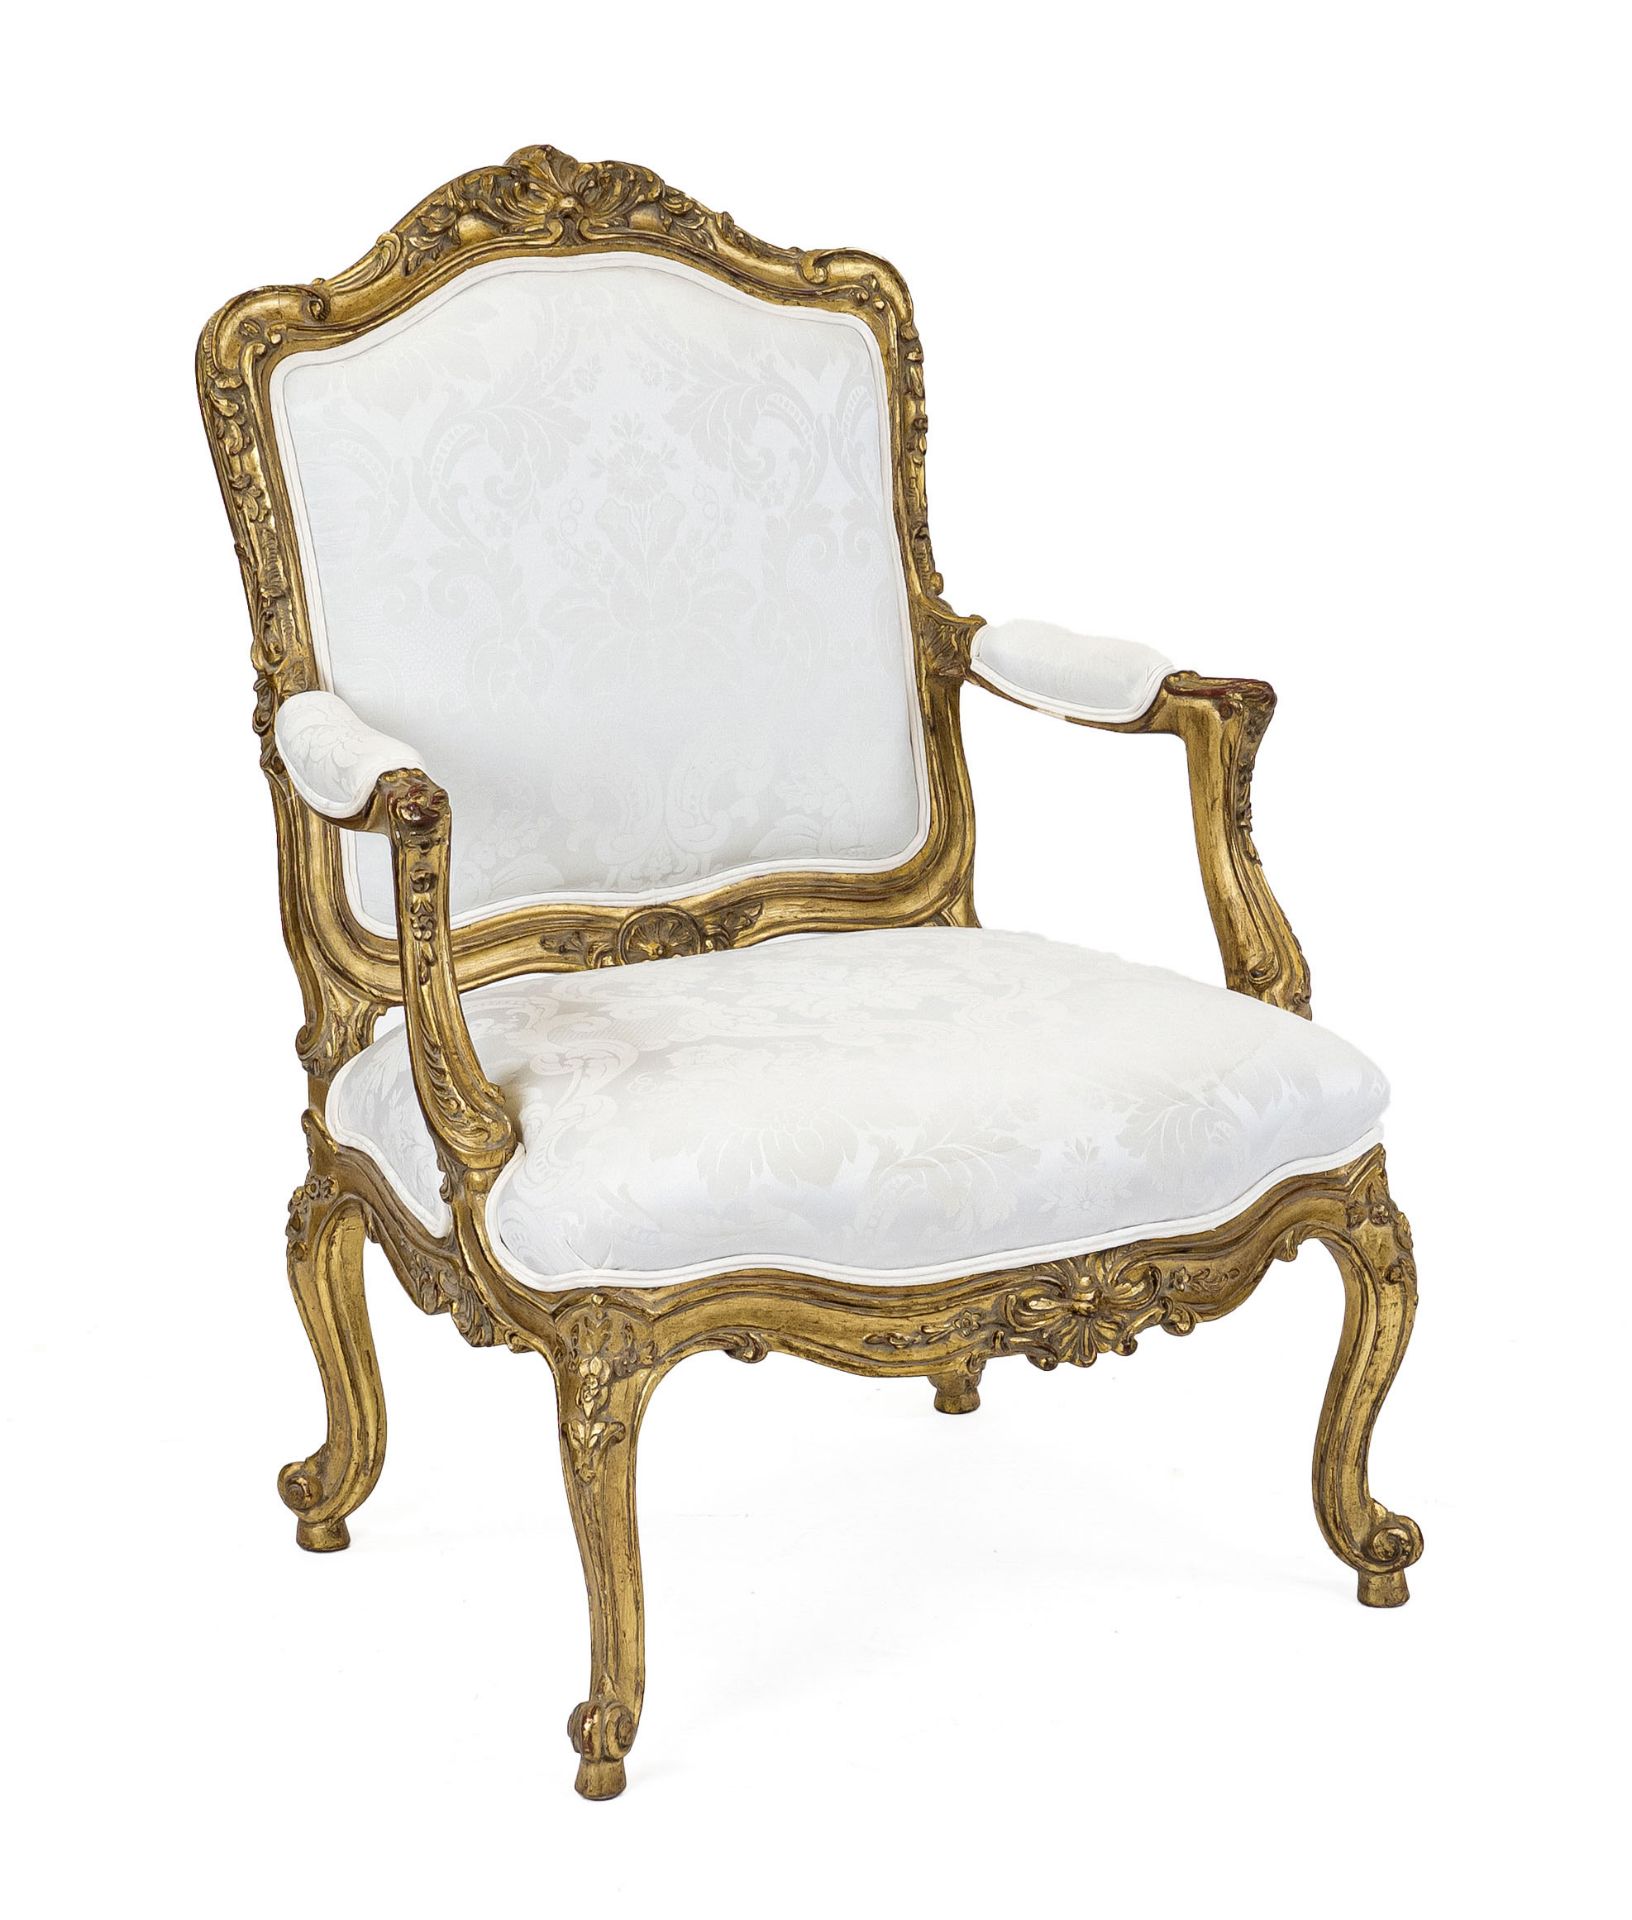 Louis Quinze-style armchair, 19th century, carved and gilded beech wood, backrest with rocaille